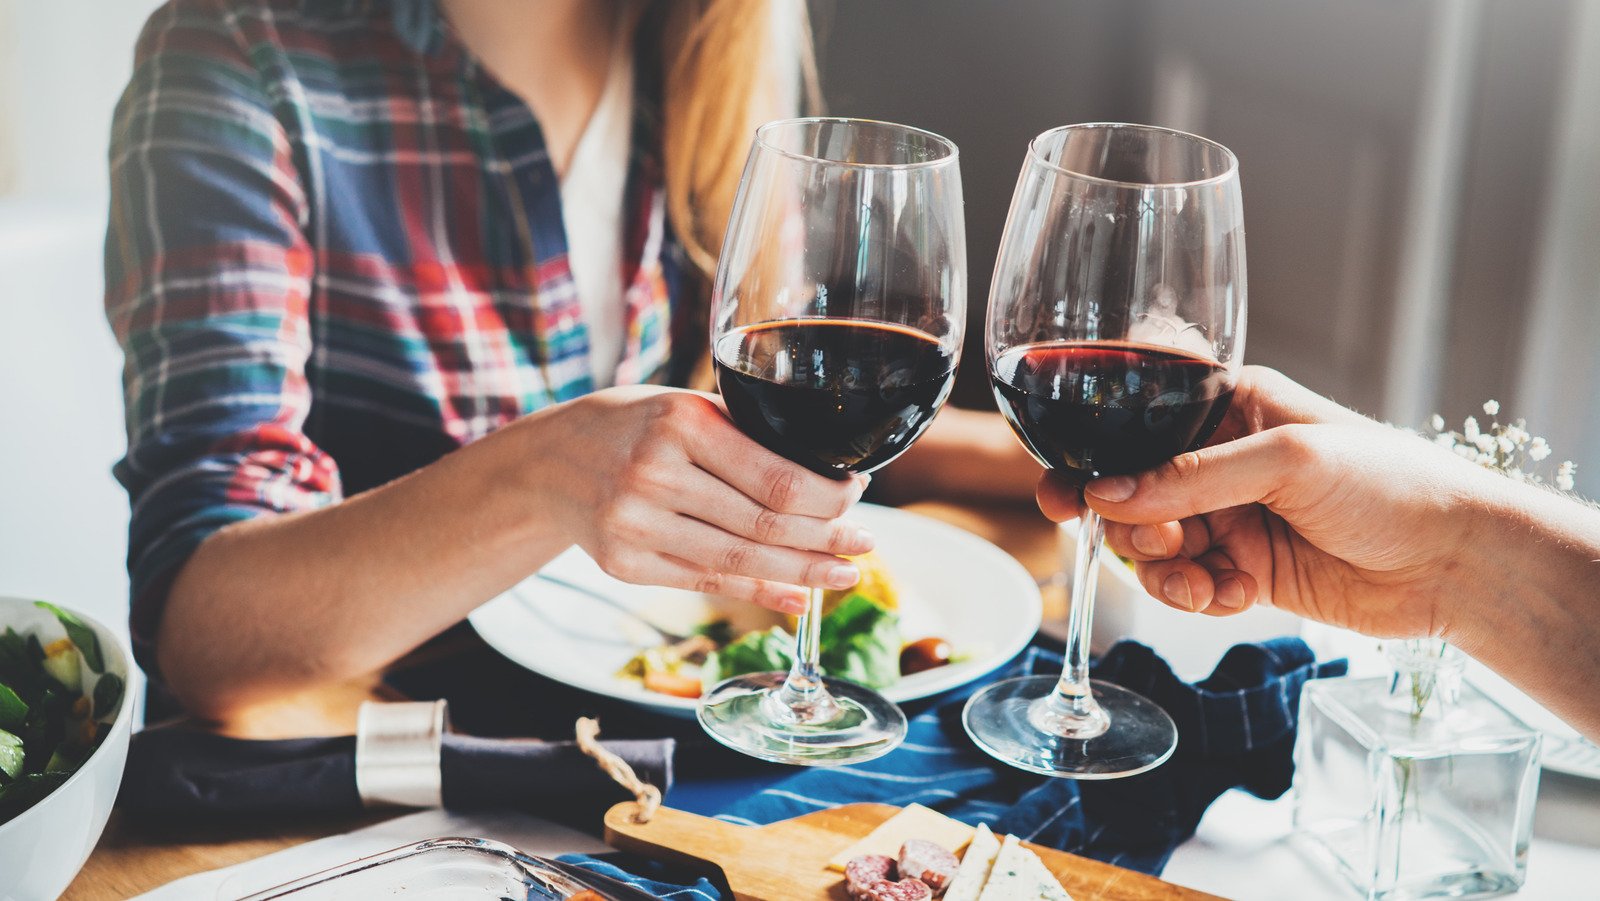 How much wine can you drink on the Mediterranean diet?